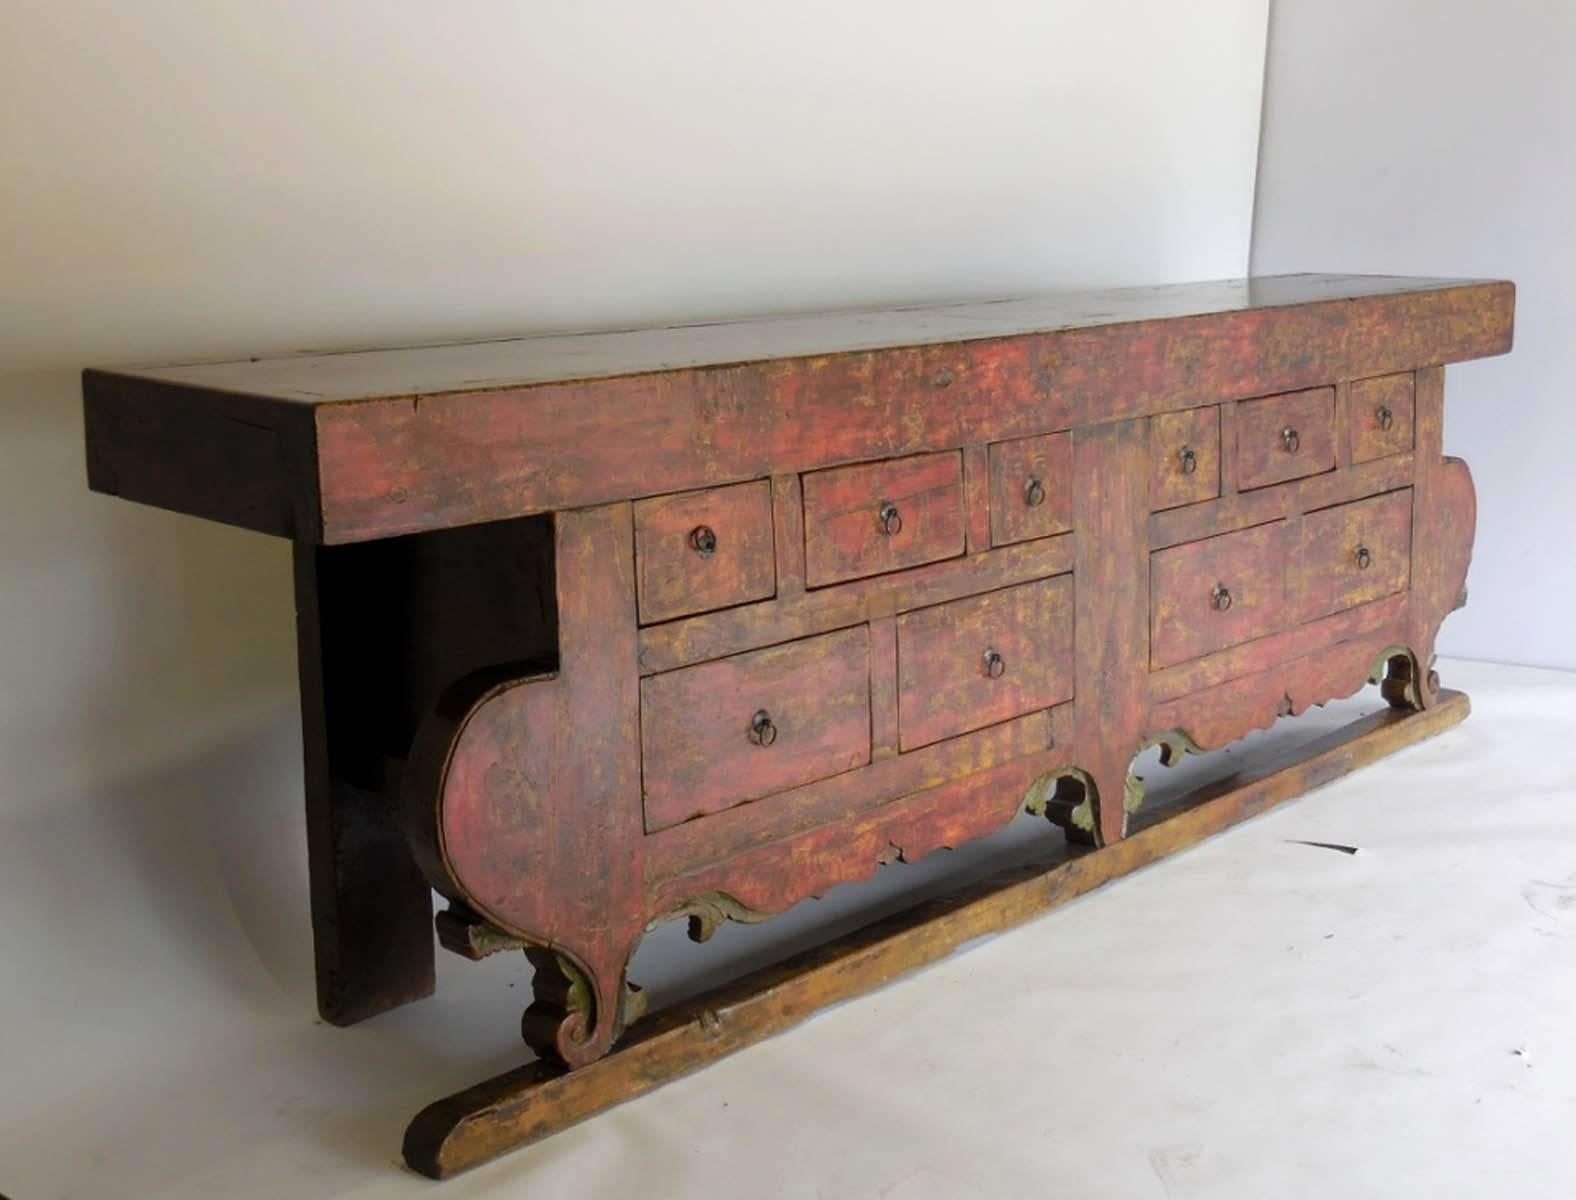 Striking, very large 18th century painted and lacquered altar table with ten fully functioning drawers. It still maintains the original red paint, gently faded through the years revealing a slight yellow undertones and is protected with a